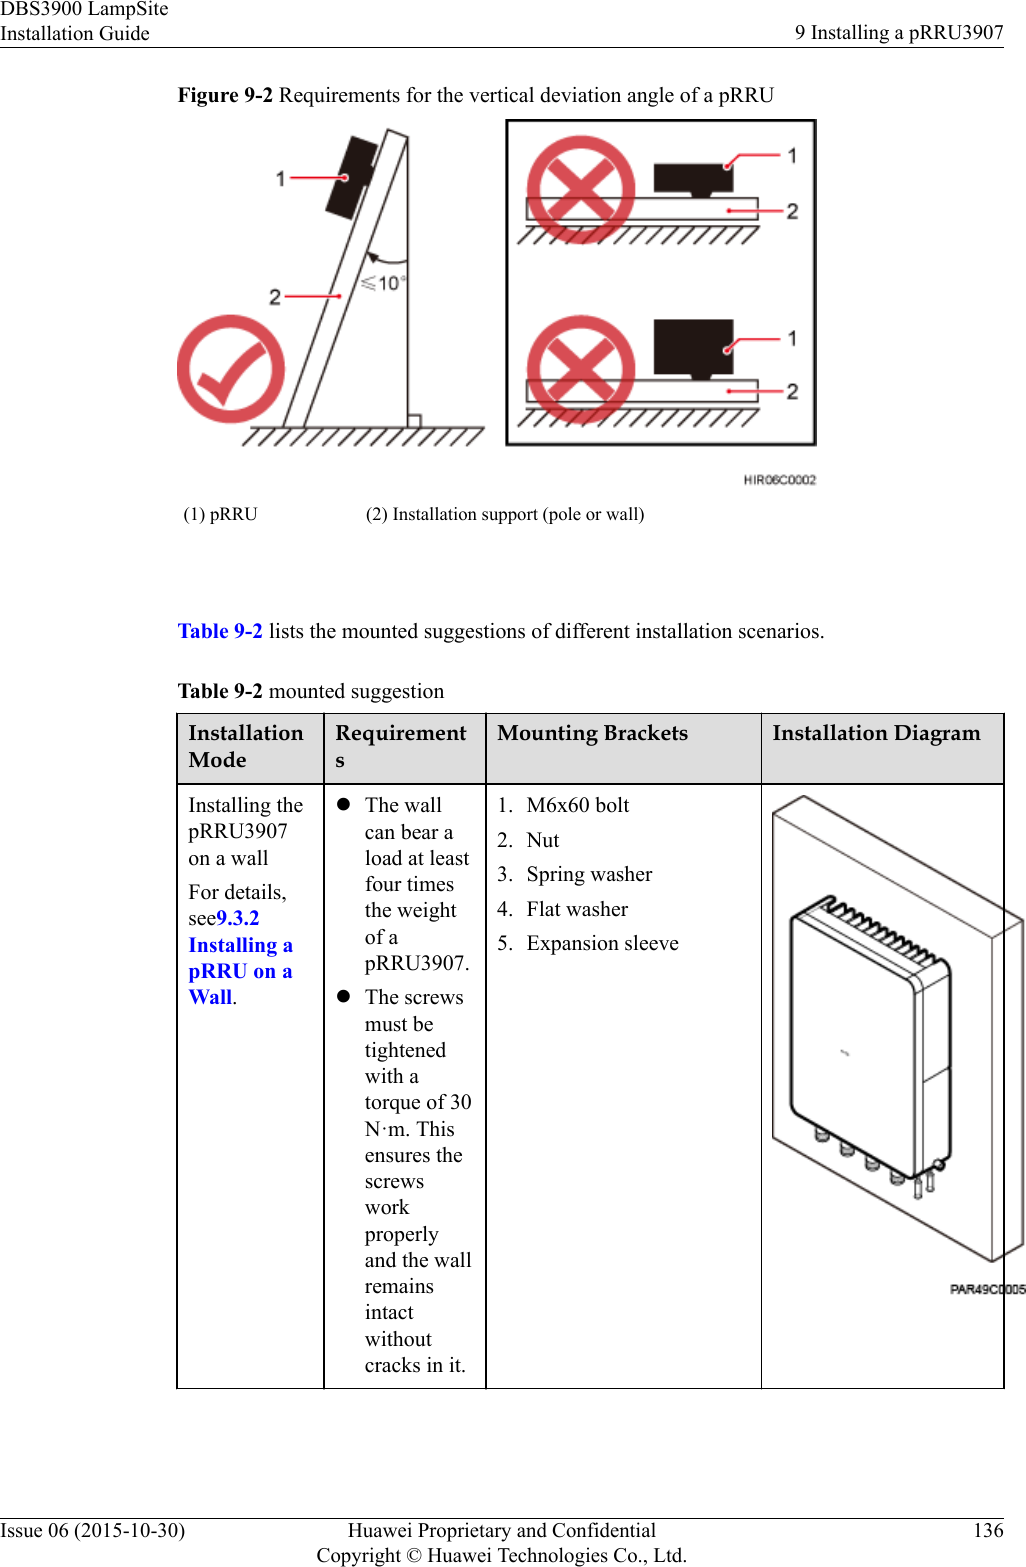 Figure 9-2 Requirements for the vertical deviation angle of a pRRU(1) pRRU (2) Installation support (pole or wall) Table 9-2 lists the mounted suggestions of different installation scenarios.Table 9-2 mounted suggestionInstallationModeRequirementsMounting Brackets Installation DiagramInstalling thepRRU3907on a wallFor details,see9.3.2Installing apRRU on aWall.lThe wallcan bear aload at leastfour timesthe weightof apRRU3907.lThe screwsmust betightenedwith atorque of 30N·m. Thisensures thescrewsworkproperlyand the wallremainsintactwithoutcracks in it.1. M6x60 bolt2. Nut3. Spring washer4. Flat washer5. Expansion sleeveDBS3900 LampSiteInstallation Guide 9 Installing a pRRU3907Issue 06 (2015-10-30) Huawei Proprietary and ConfidentialCopyright © Huawei Technologies Co., Ltd.136